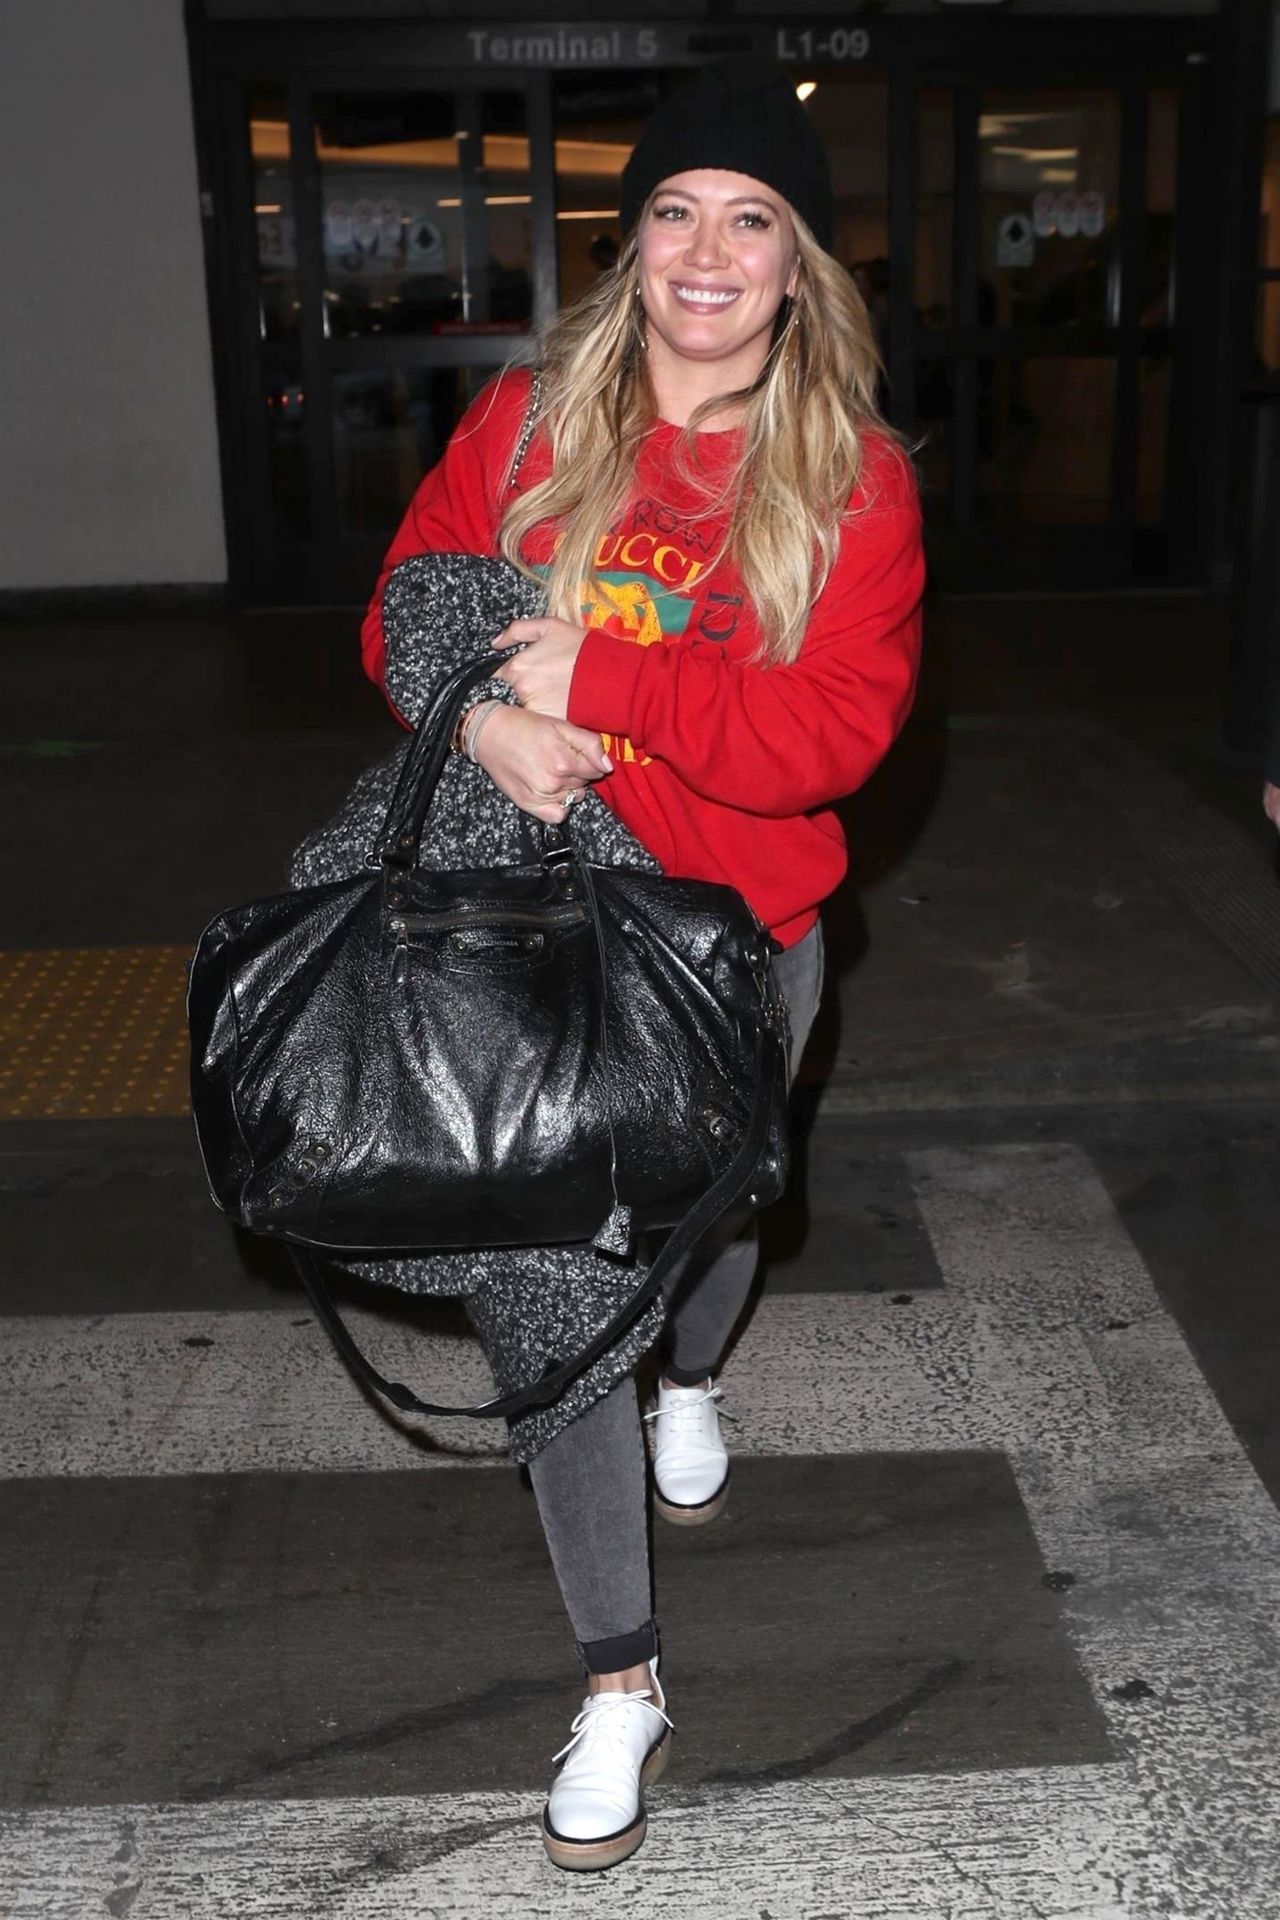 Hilary Duff departs from the airport carrying luggage from Louis